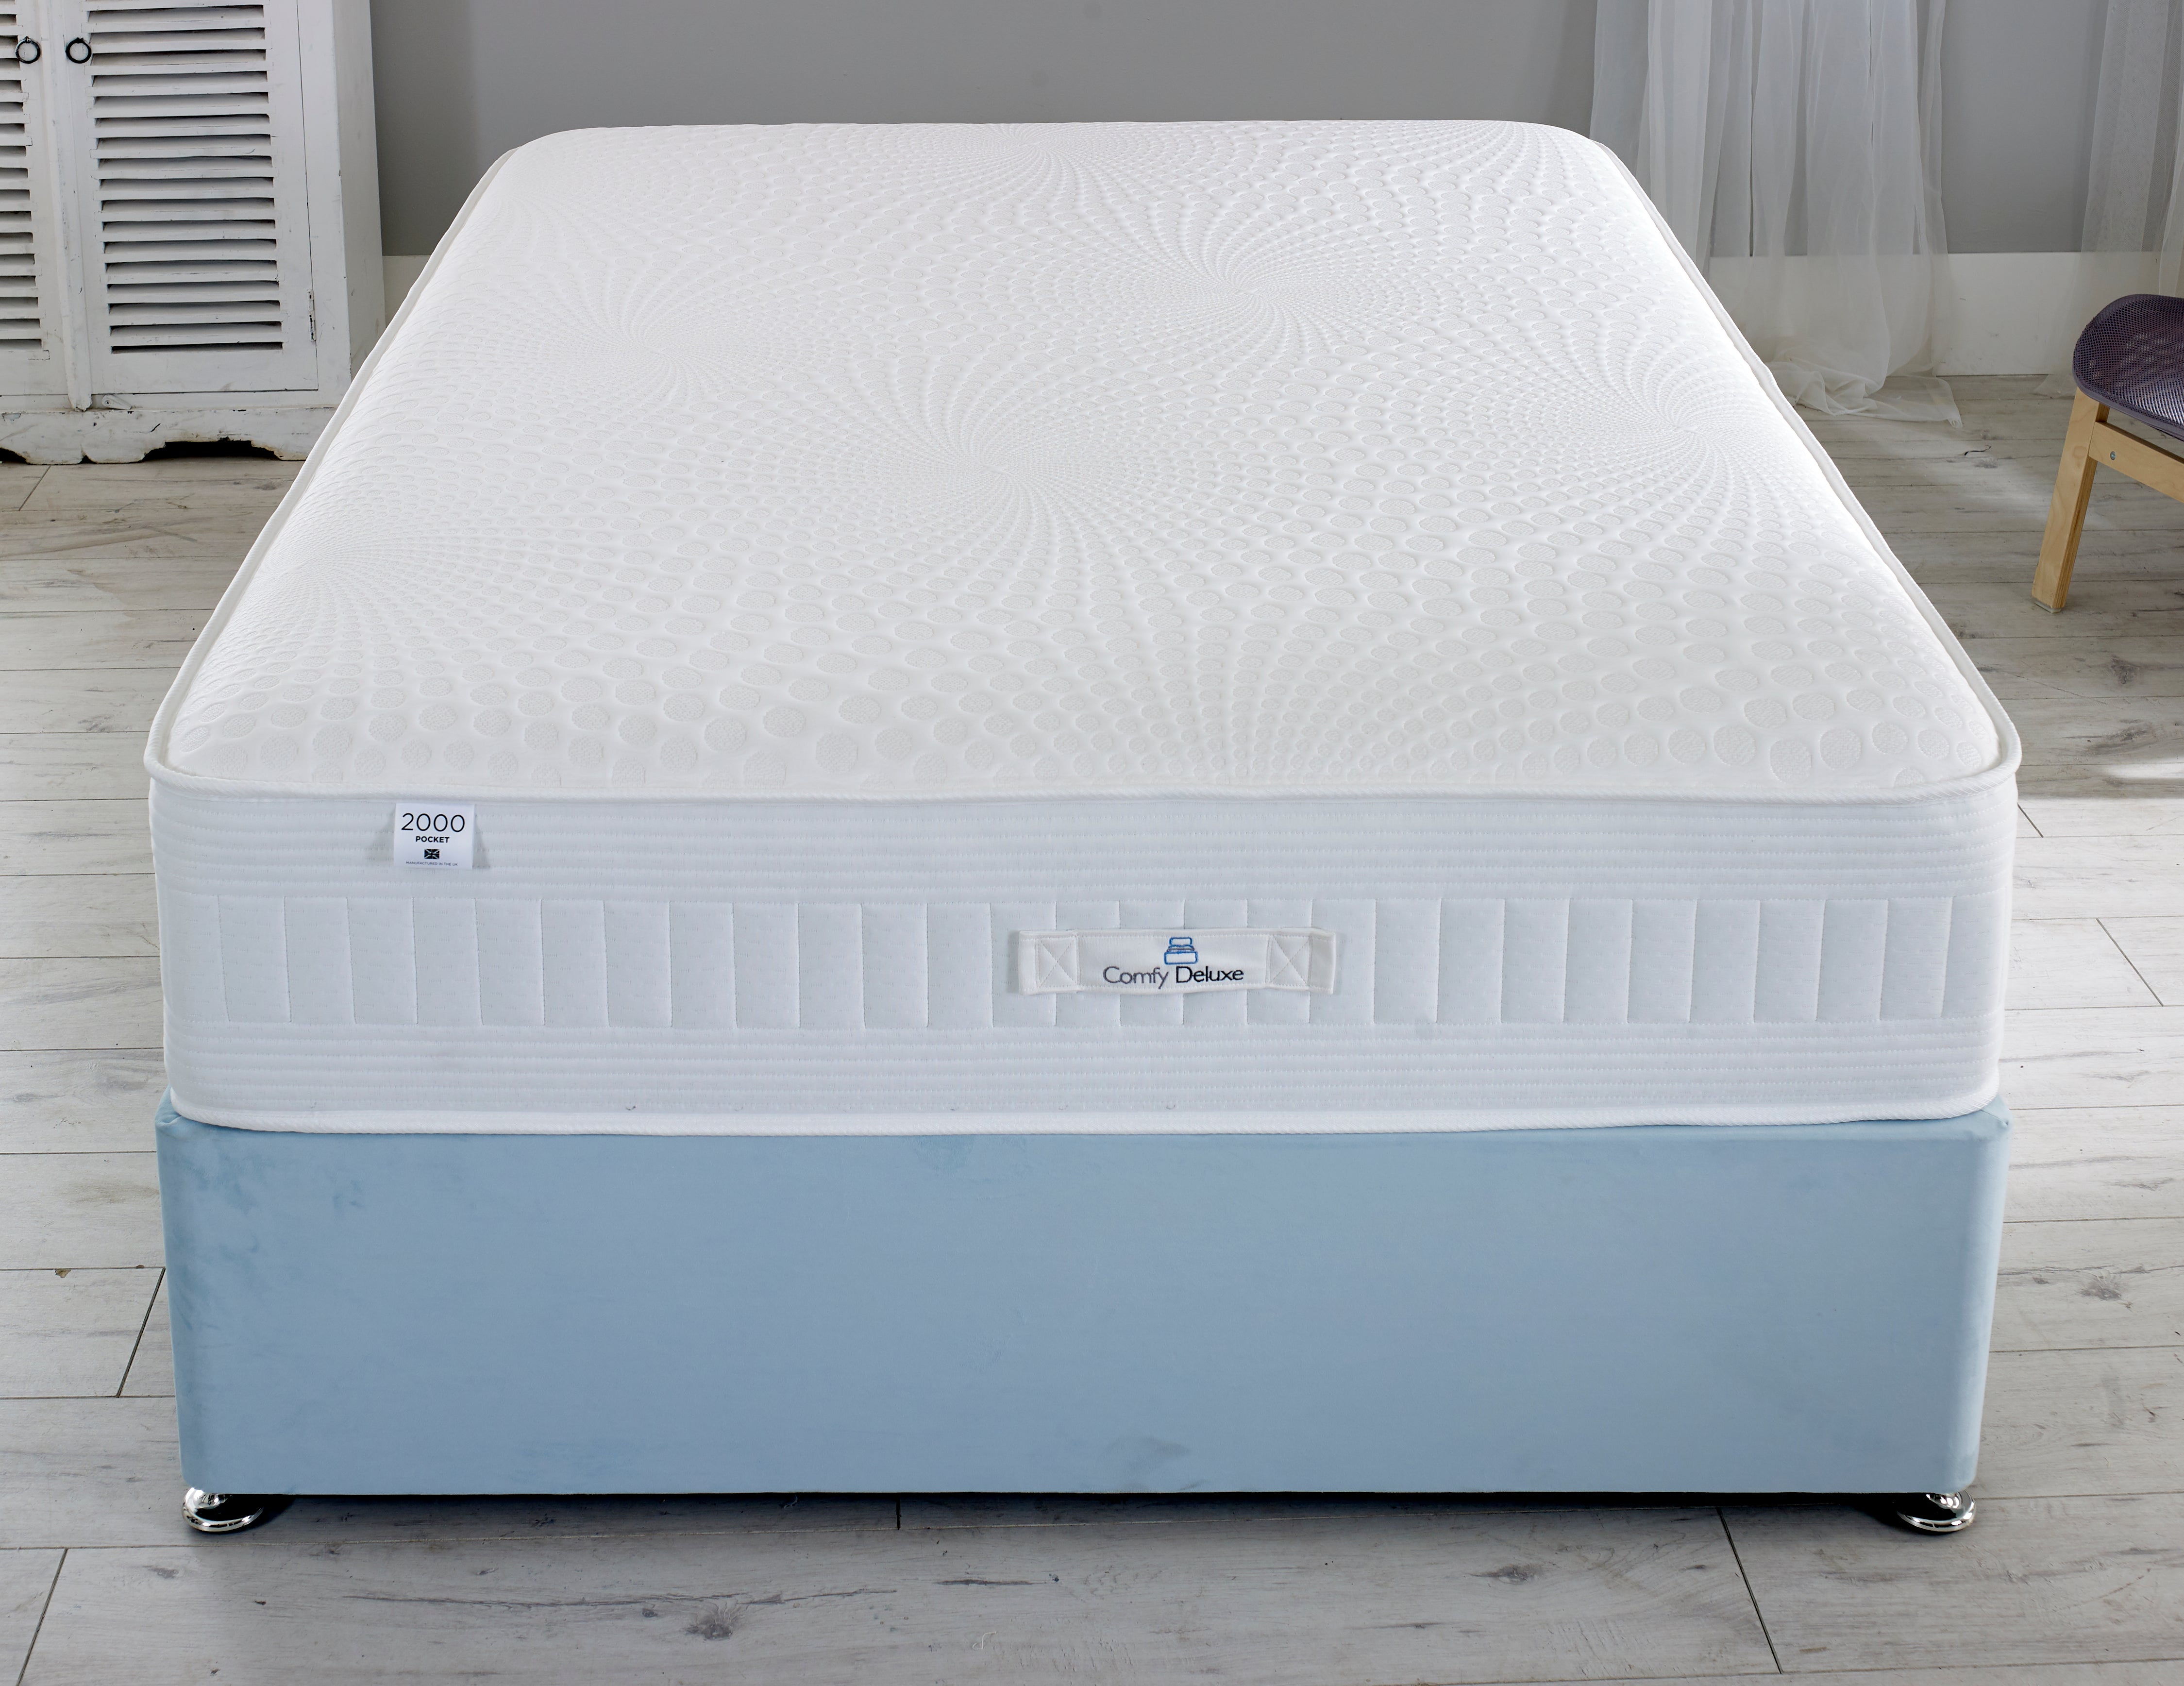 Lilly Pocket Natural Fillings Encapsulated Mattress